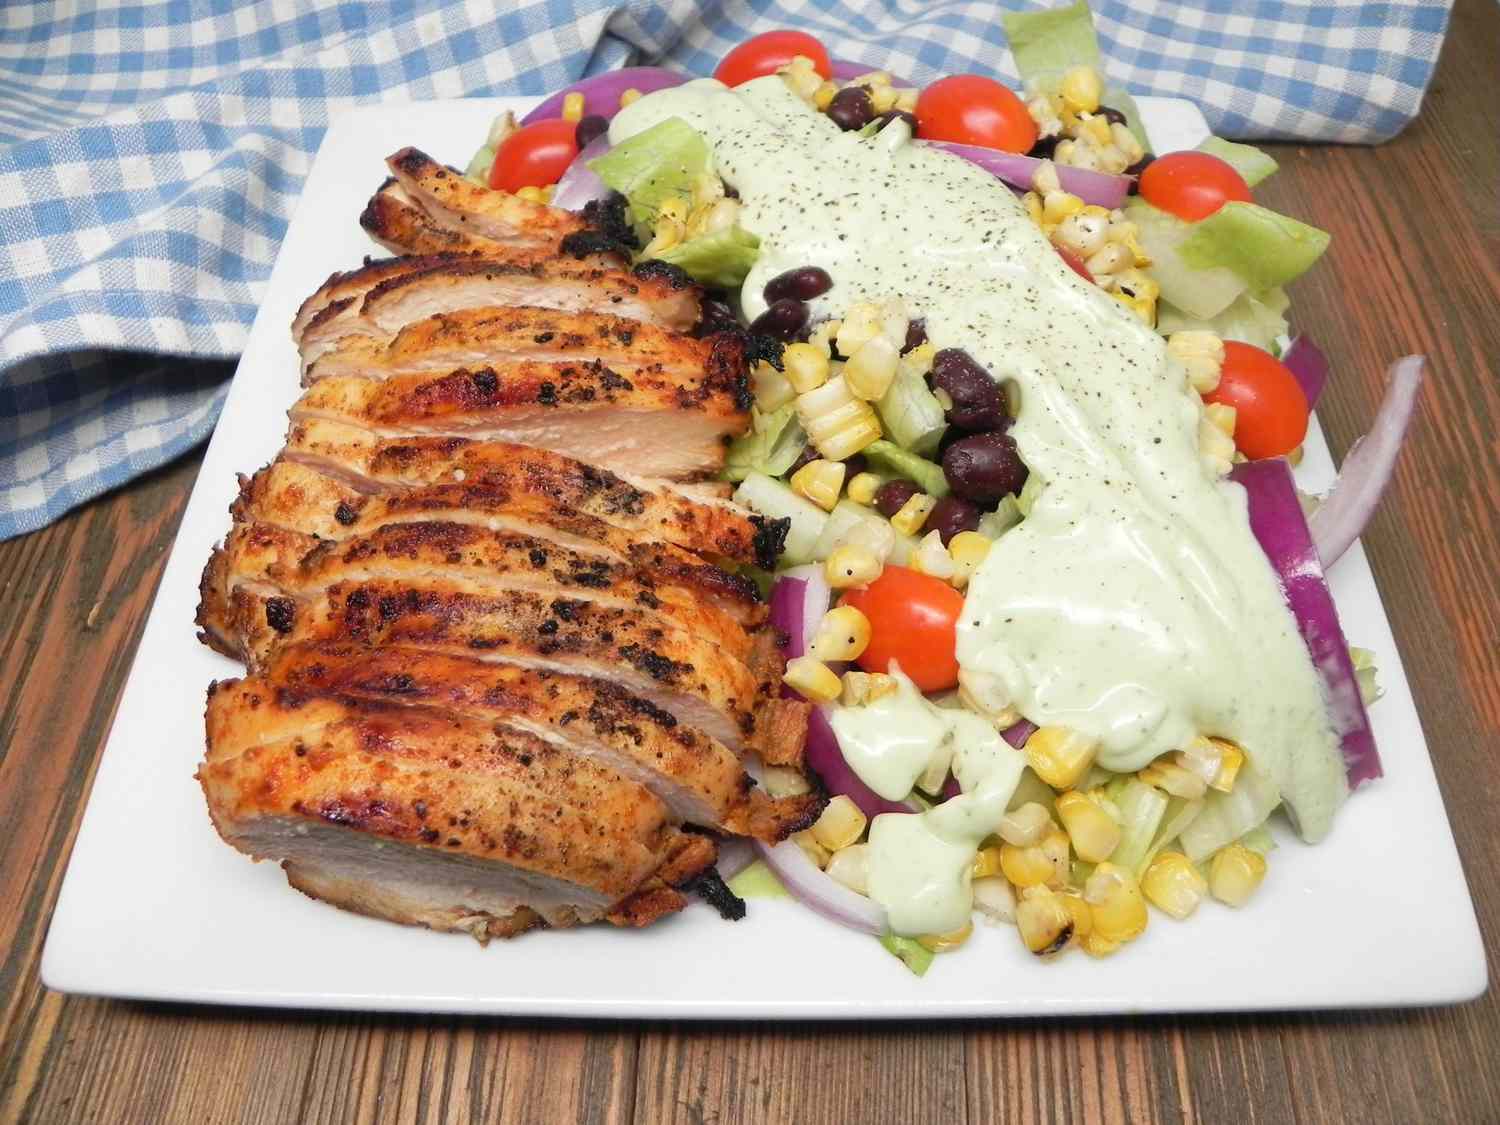 Sliced grilled chicken on southwest salad with avocado ranch dressing